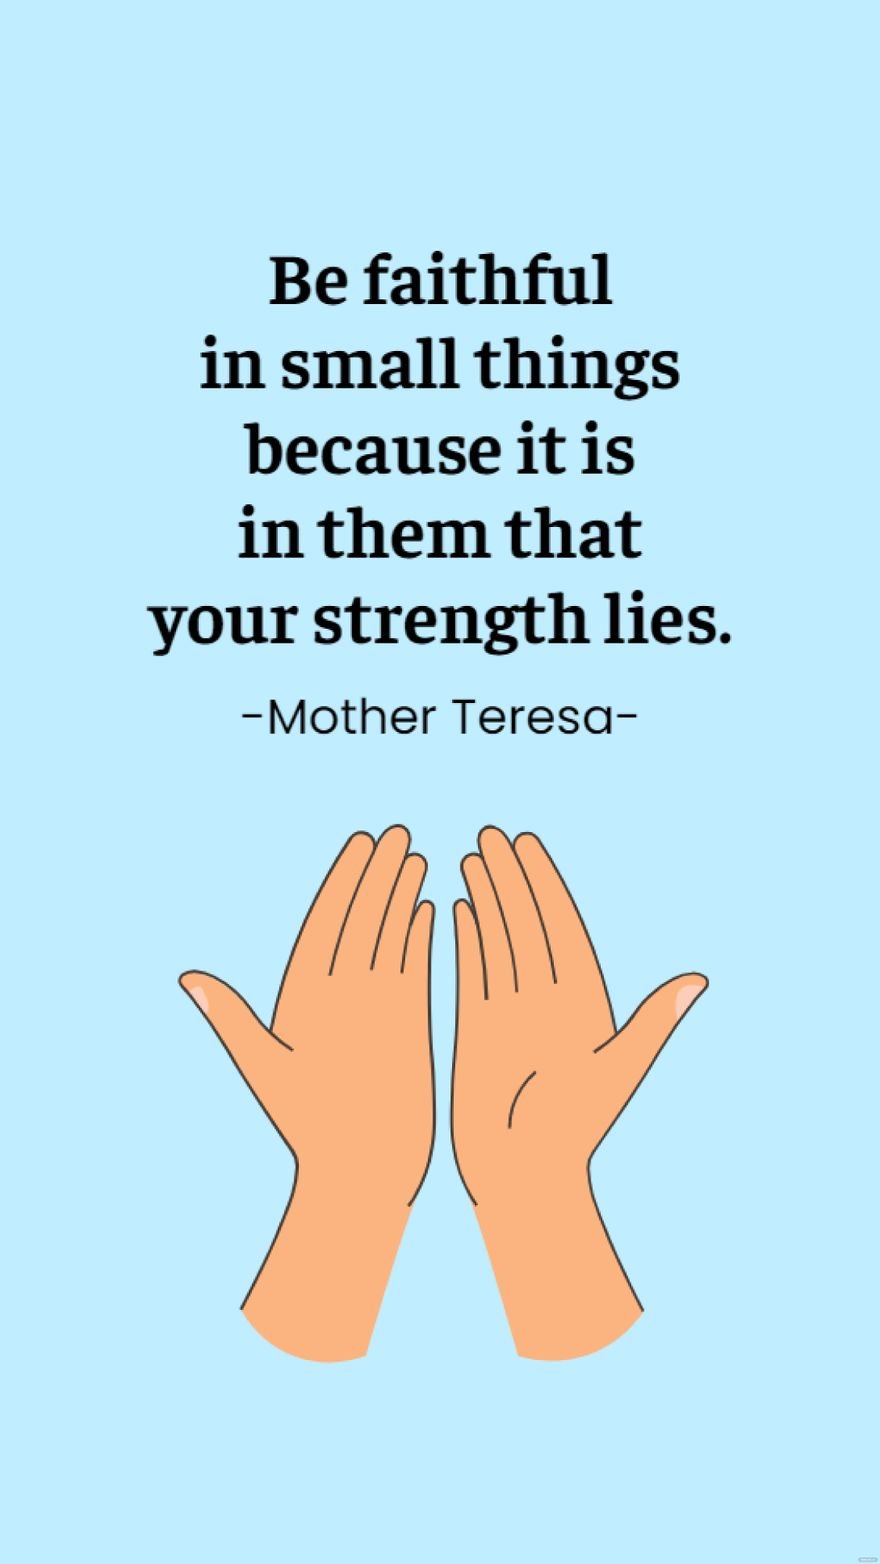 Free Mother Teresa - Be faithful in small things because it is in them that your strength lies. in JPG